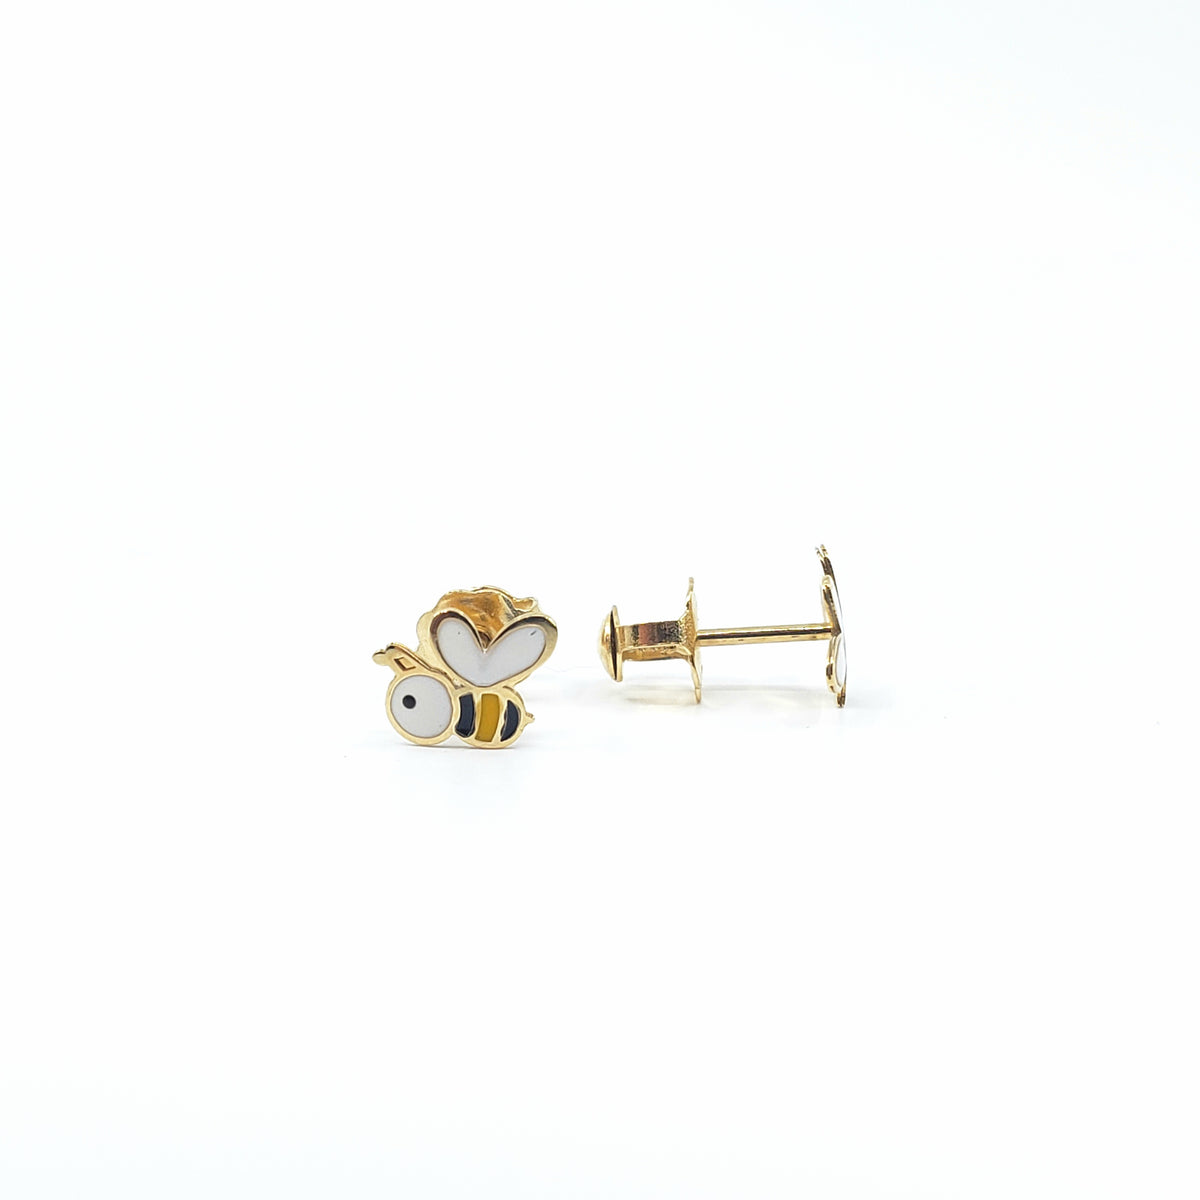 10K Yellow Gold Bumble Bee Studs with Screw Back - 7mm x 6mm